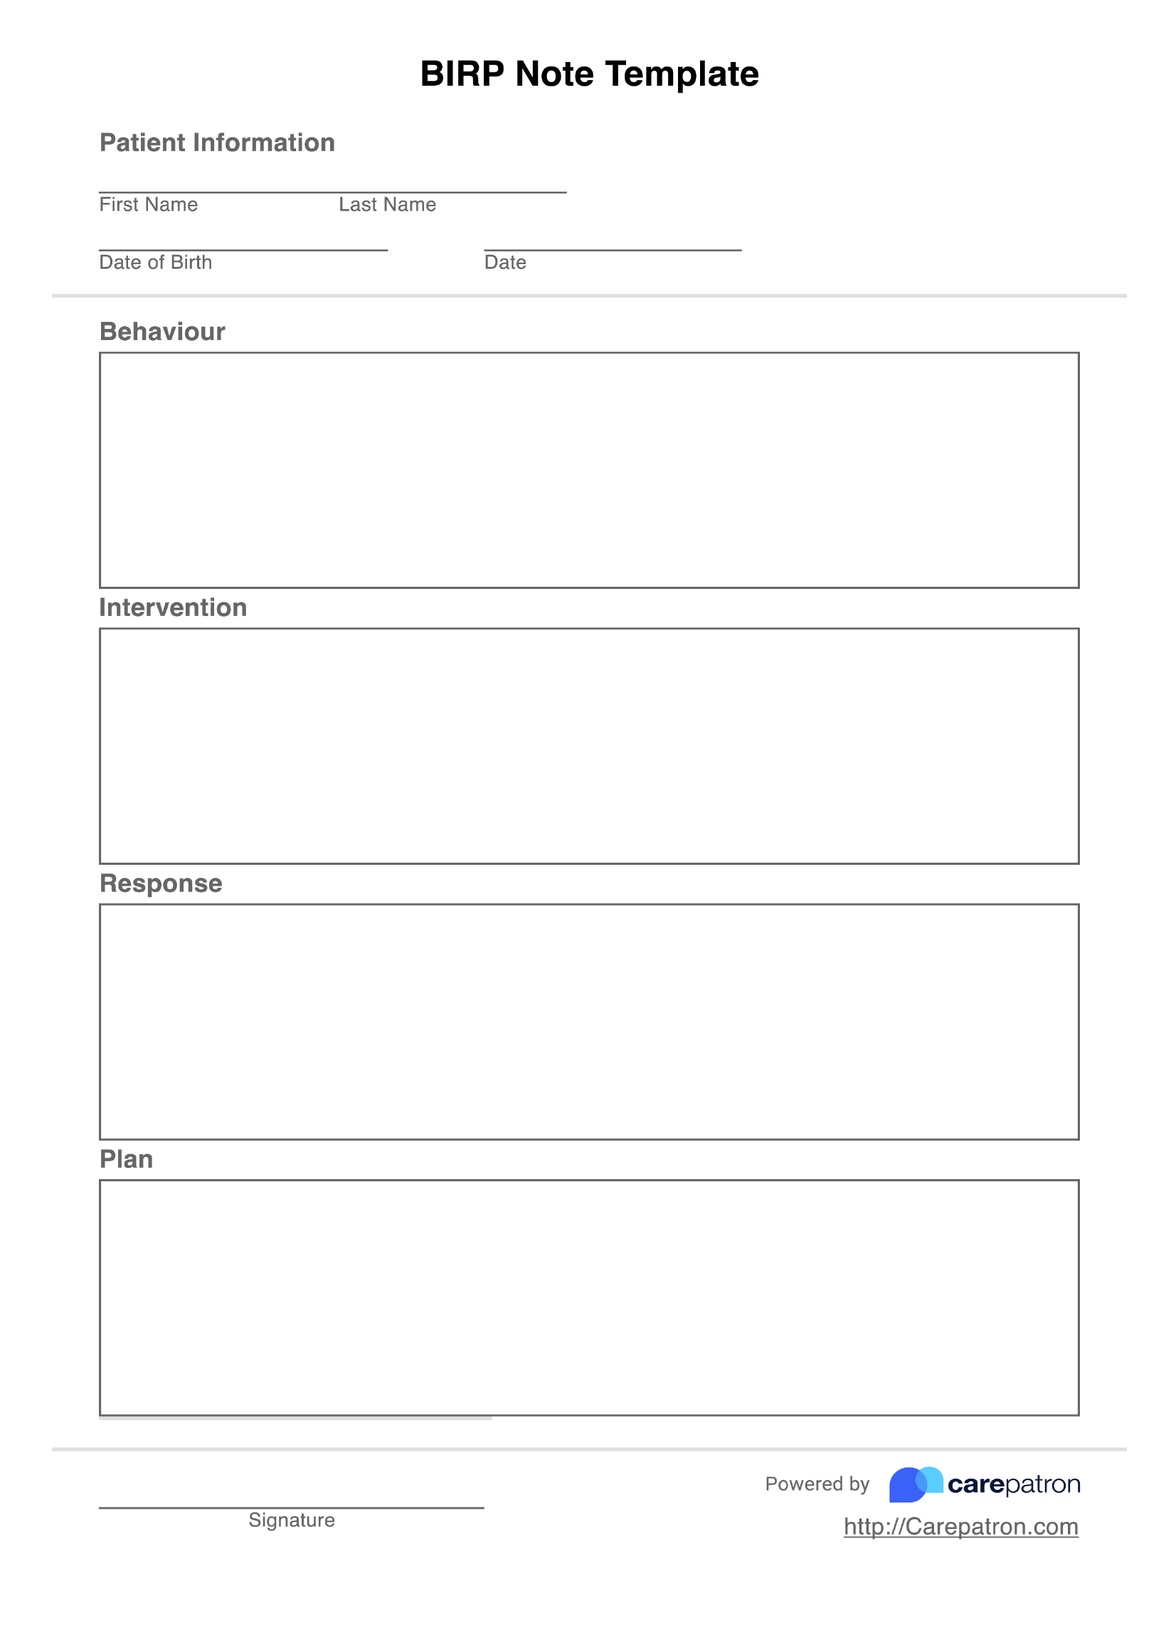 BIRP Notes Template PDF Example